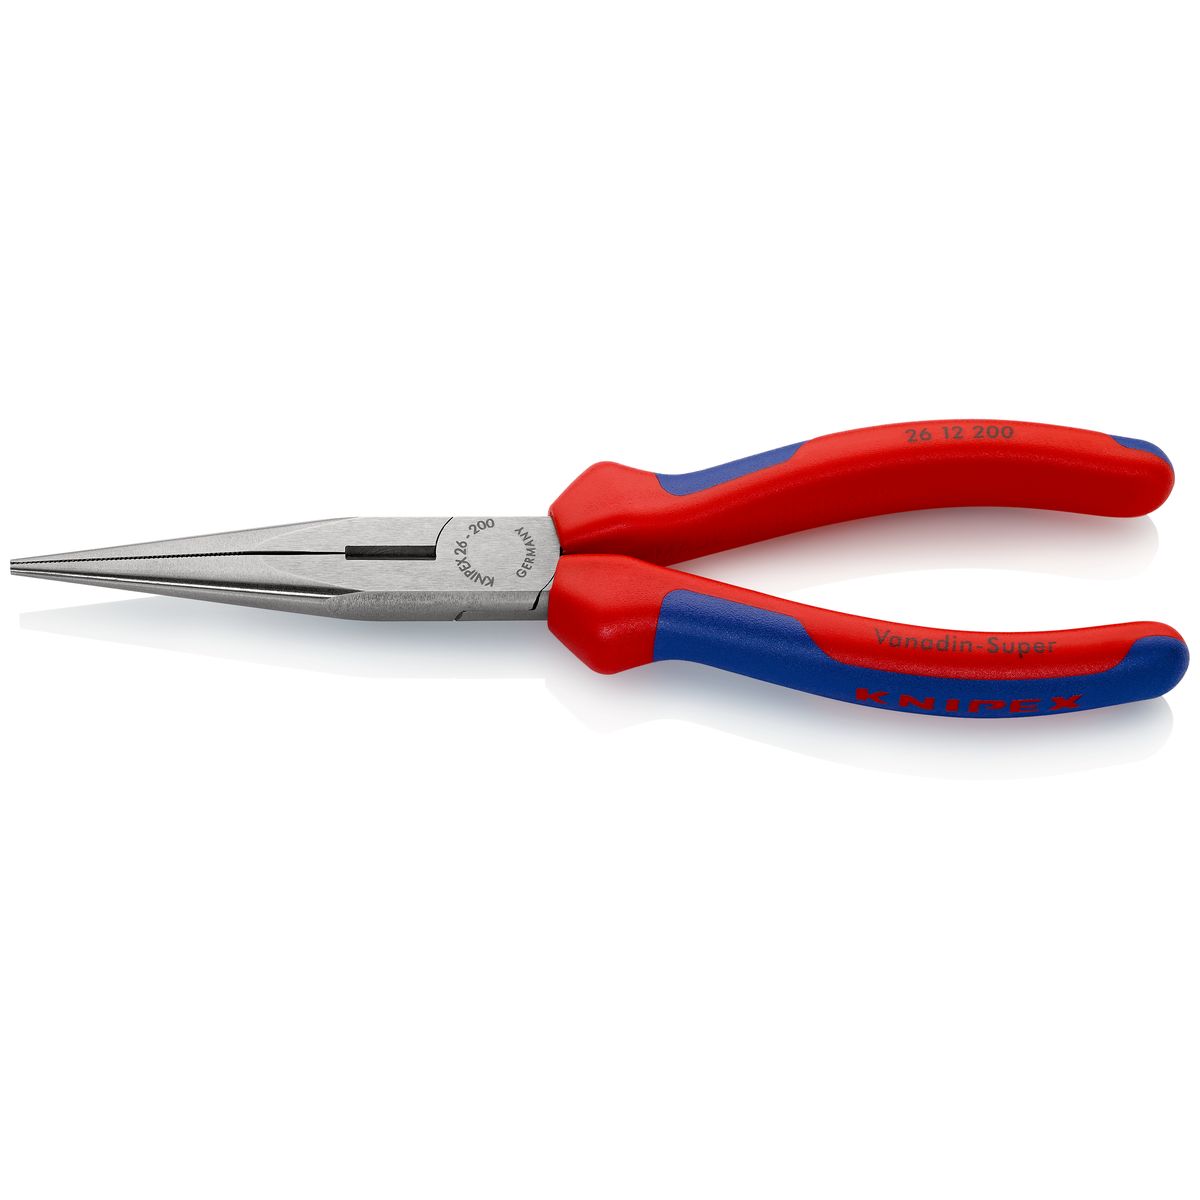 SNIPE NOSE SIDE CUTTING PLIERS 2612200 Knipex